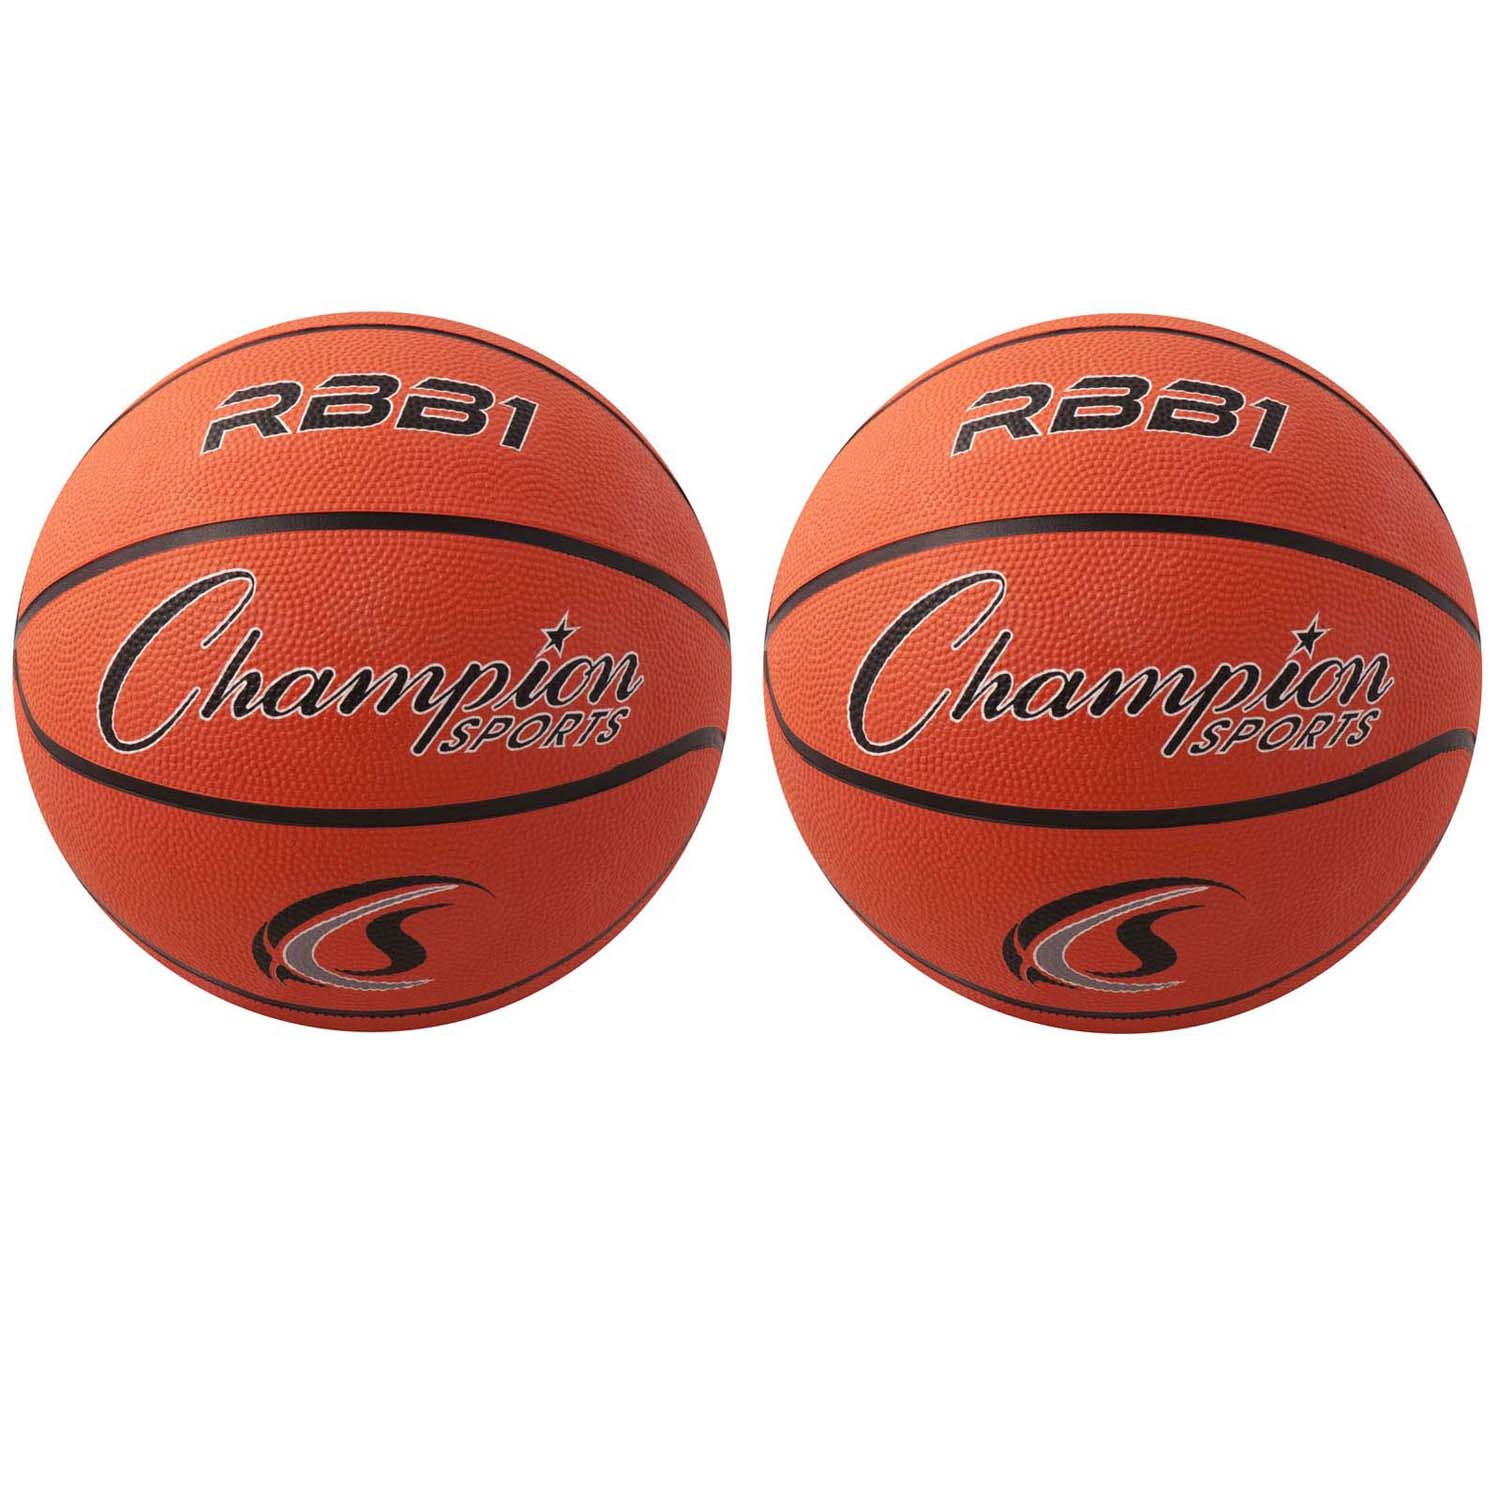 Offical Size Rubber Basketball, Orange, Pack of 2